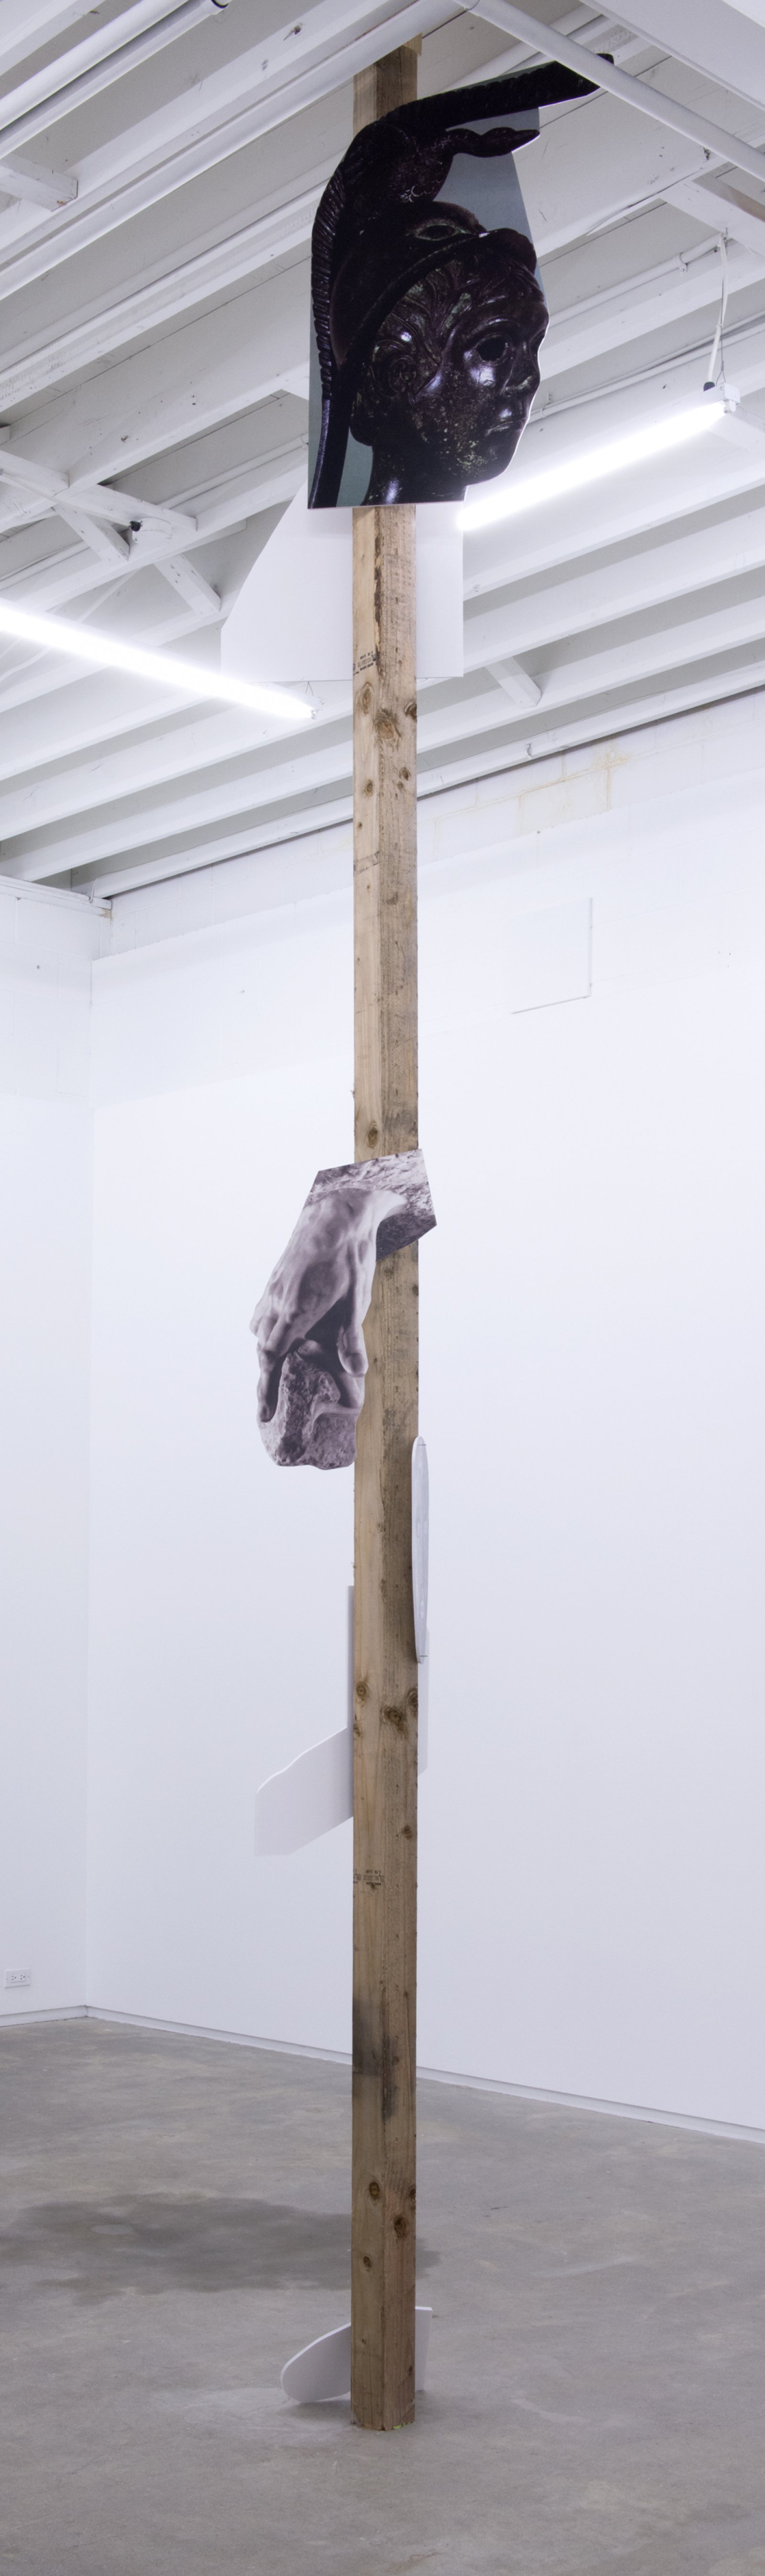 Geoffrey Farmer, The part of the cane, which curves under to meet the fingers...., 2014, douglas fir pole, 6 photographs mounted on foamcore, 192 x 4 x 4 in. (488 x 9 x 9 cm) by Geoffrey Farmer